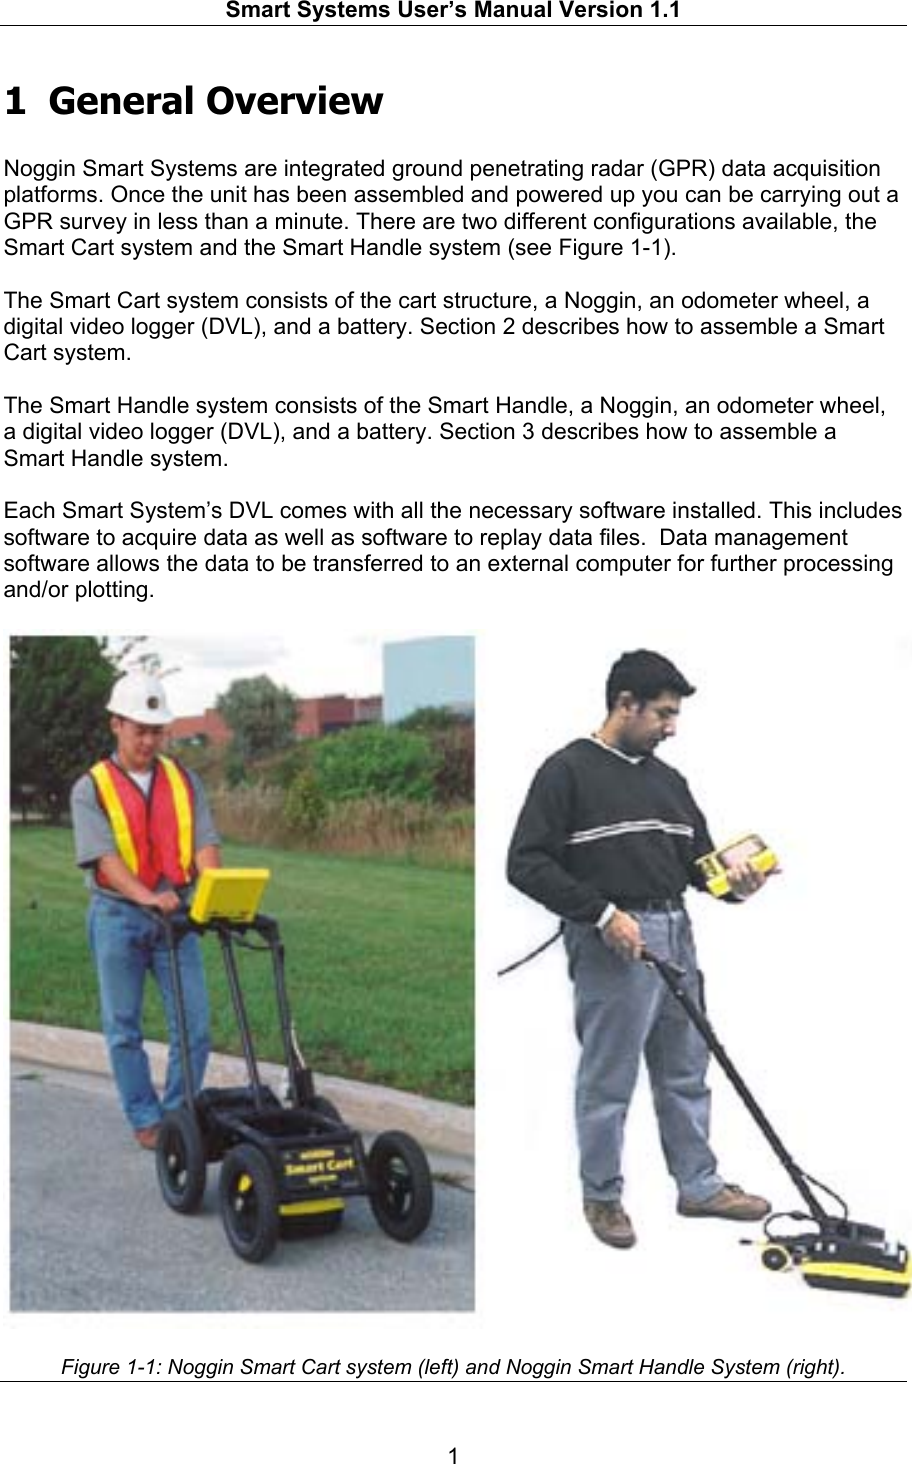   Smart Systems User’s Manual Version 1.1  1  1 General Overview  Noggin Smart Systems are integrated ground penetrating radar (GPR) data acquisition platforms. Once the unit has been assembled and powered up you can be carrying out a GPR survey in less than a minute. There are two different configurations available, the Smart Cart system and the Smart Handle system (see Figure 1-1).  The Smart Cart system consists of the cart structure, a Noggin, an odometer wheel, a digital video logger (DVL), and a battery. Section 2 describes how to assemble a Smart Cart system.  The Smart Handle system consists of the Smart Handle, a Noggin, an odometer wheel, a digital video logger (DVL), and a battery. Section 3 describes how to assemble a Smart Handle system.  Each Smart System’s DVL comes with all the necessary software installed. This includes software to acquire data as well as software to replay data files.  Data management software allows the data to be transferred to an external computer for further processing and/or plotting.     Figure 1-1: Noggin Smart Cart system (left) and Noggin Smart Handle System (right).  